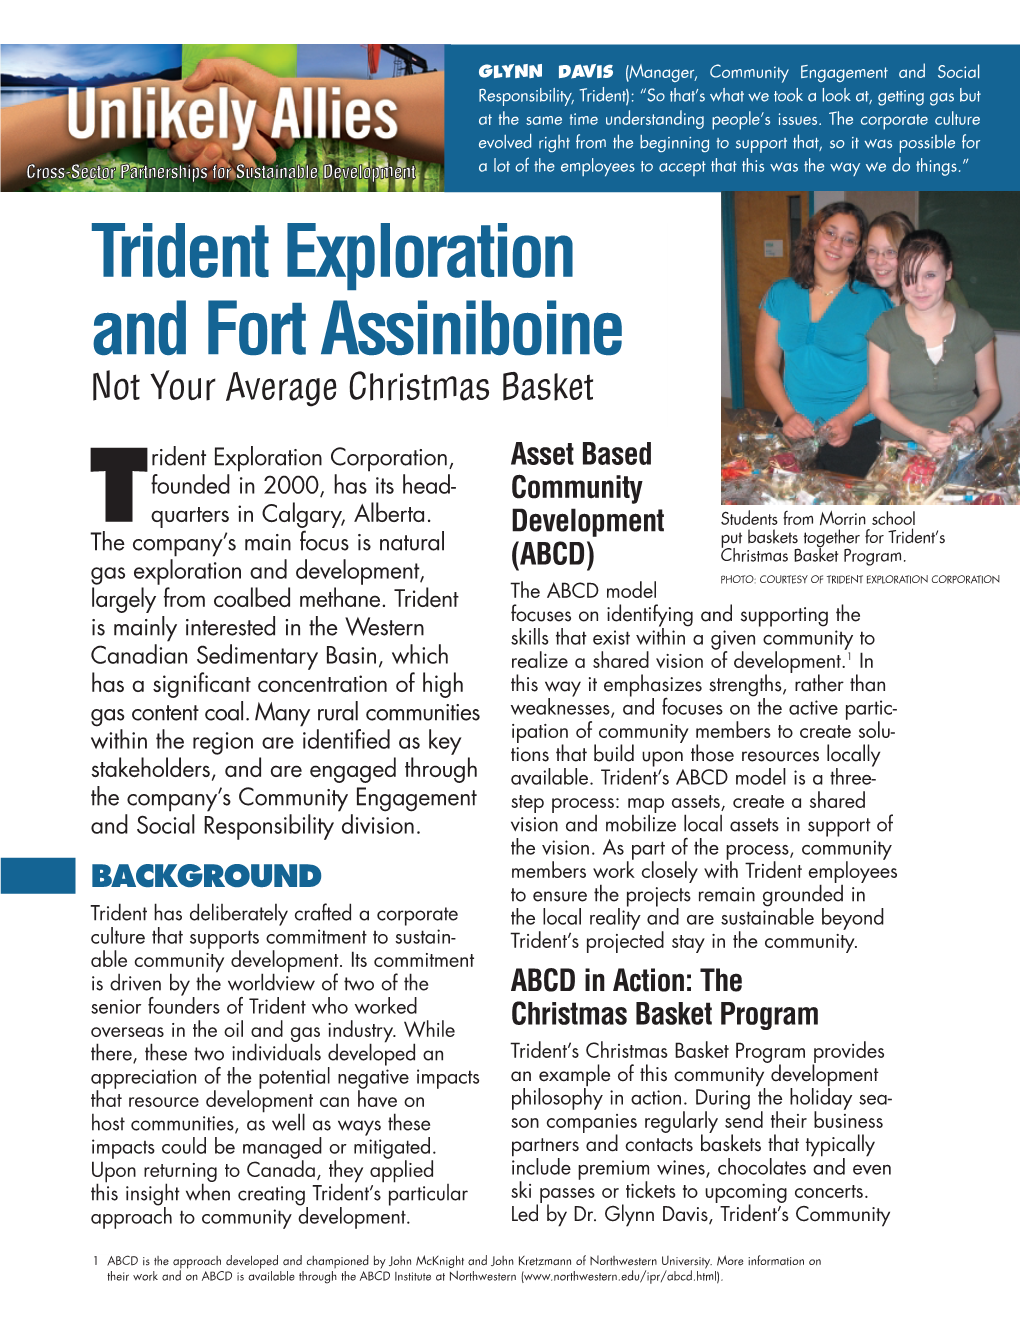 Trident Exploration and Fort Assiniboine Not Your Average Christmas Basket